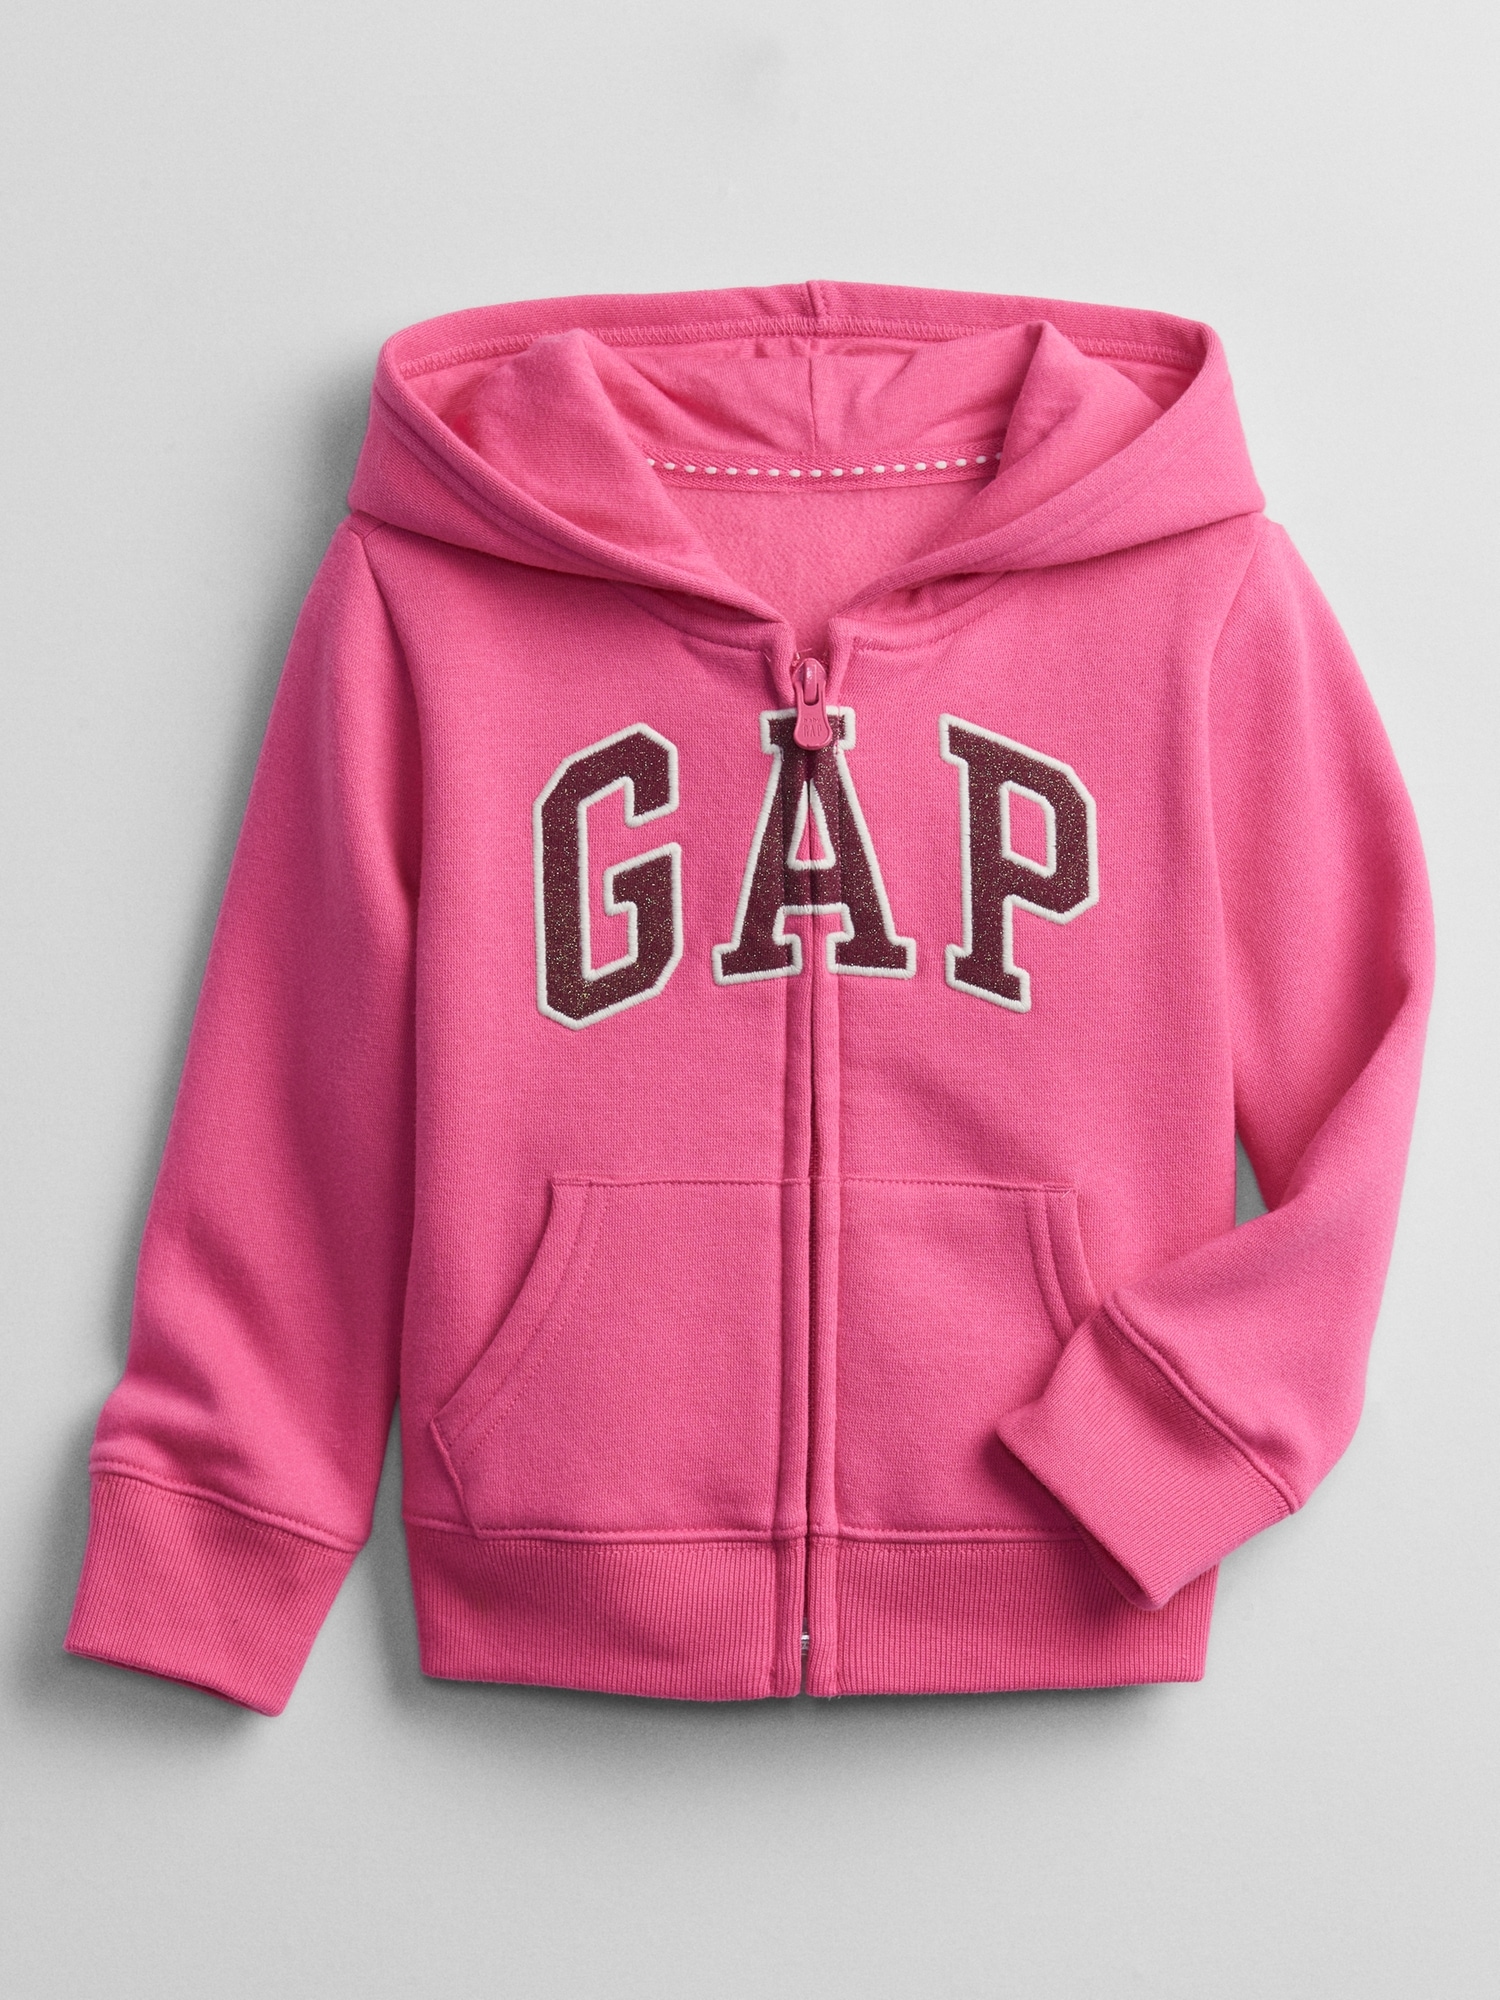 NEW GAP LOGO GRAPHIC LIGHTWEIGHT HOODIE SIZE 2T 3T 4T 5T 